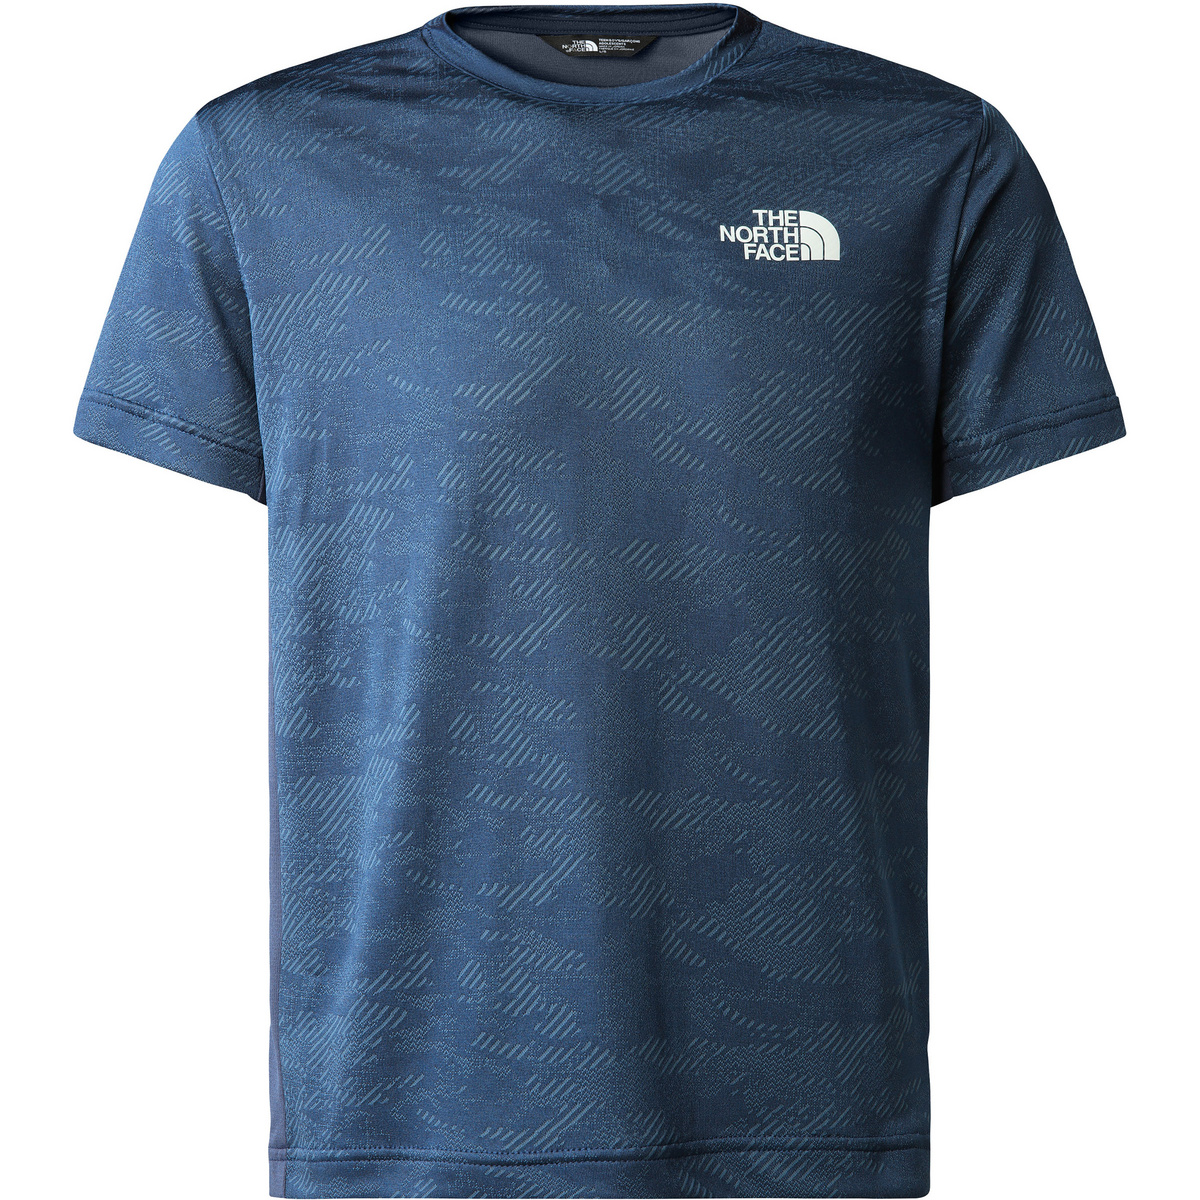 The North Face Kinder B Mountain Athletics T-Shirt von The North Face